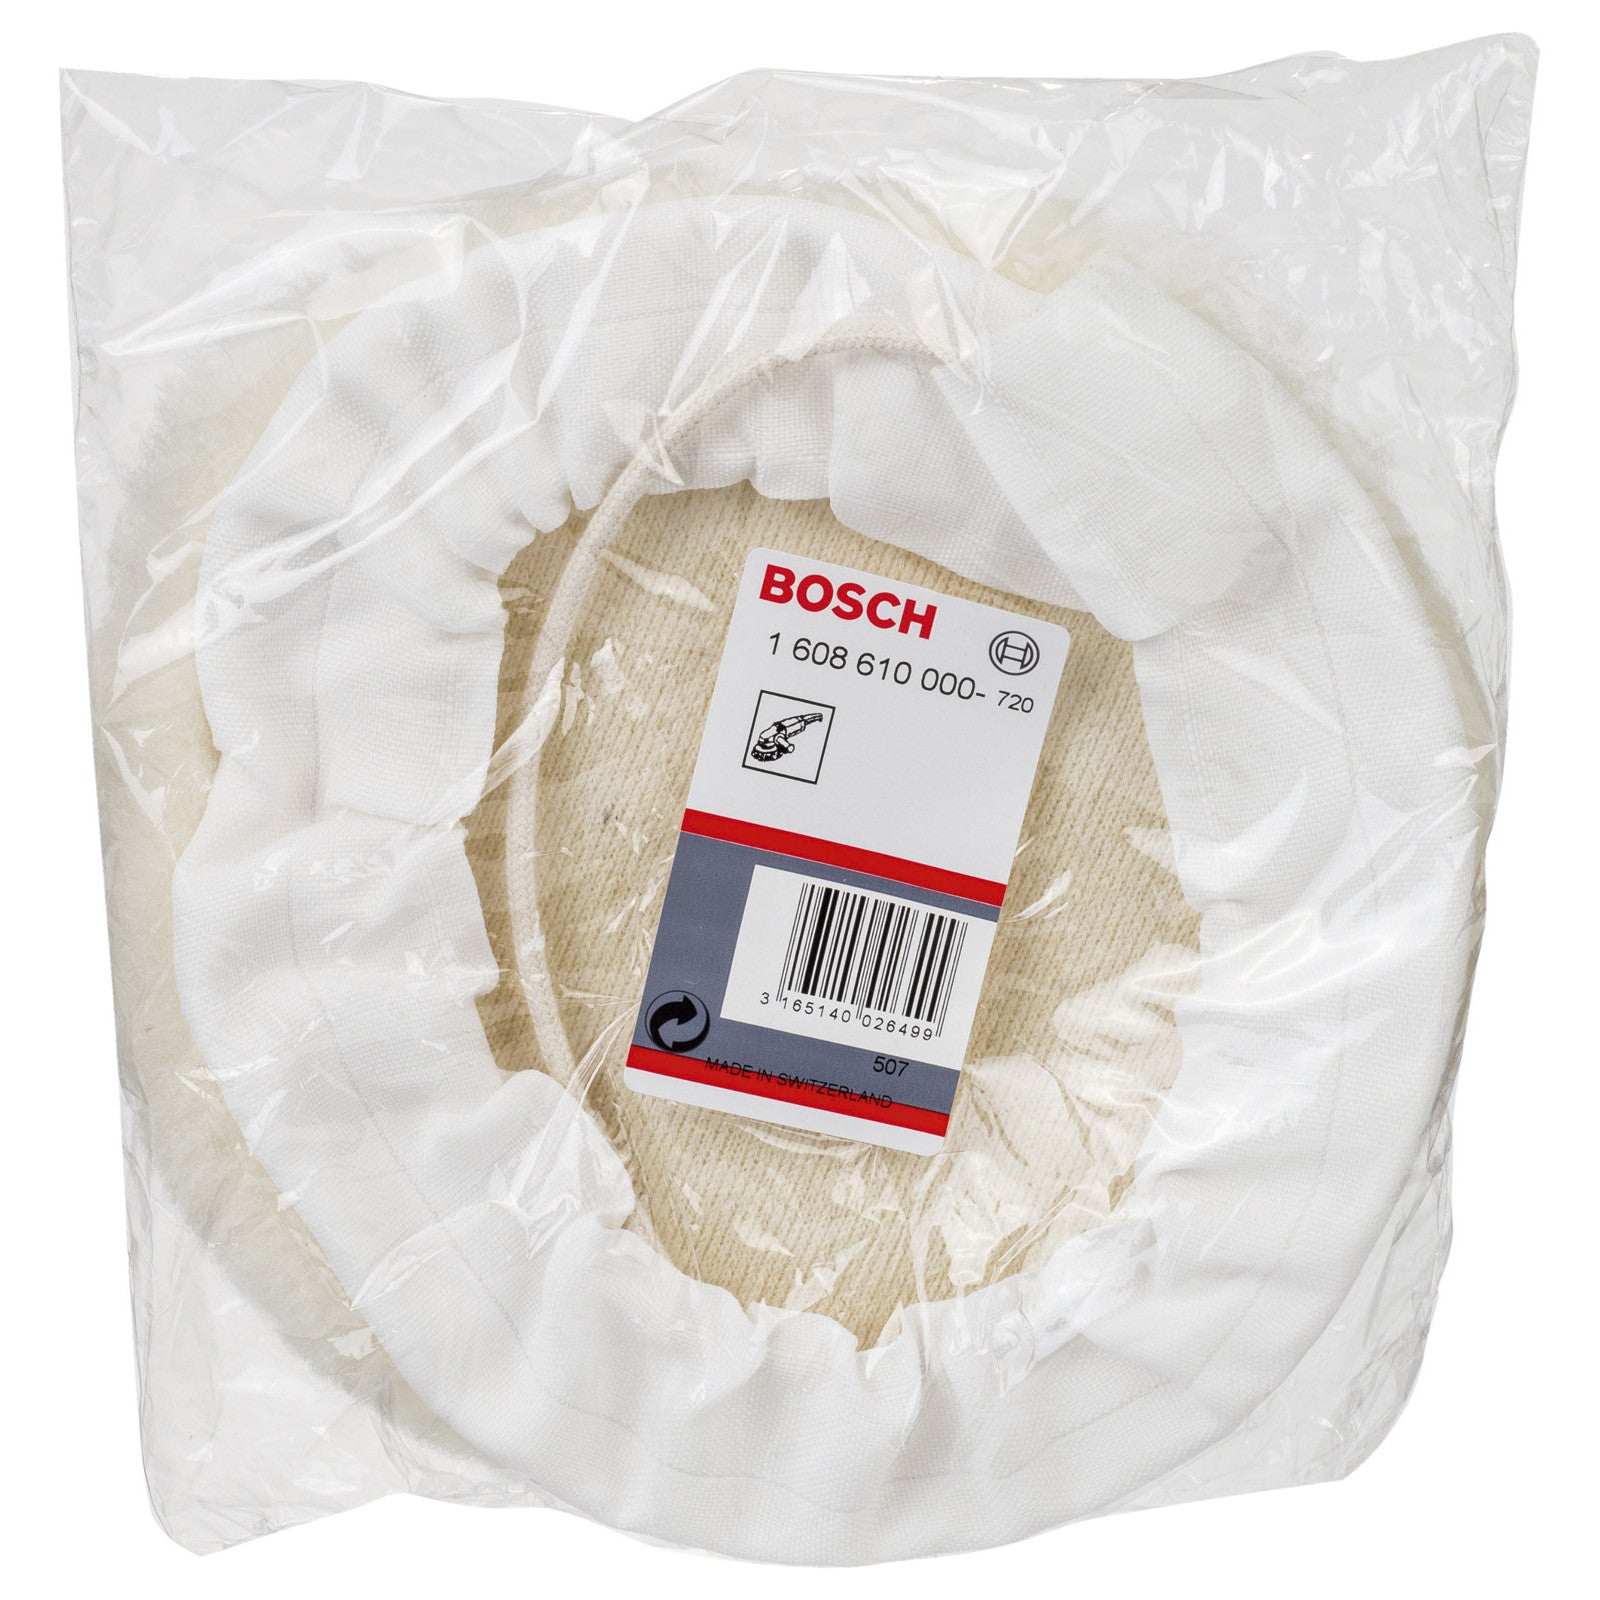 Bosch Lambswool bonnet for polishers, 180mm 1608610000 Power Tool Services